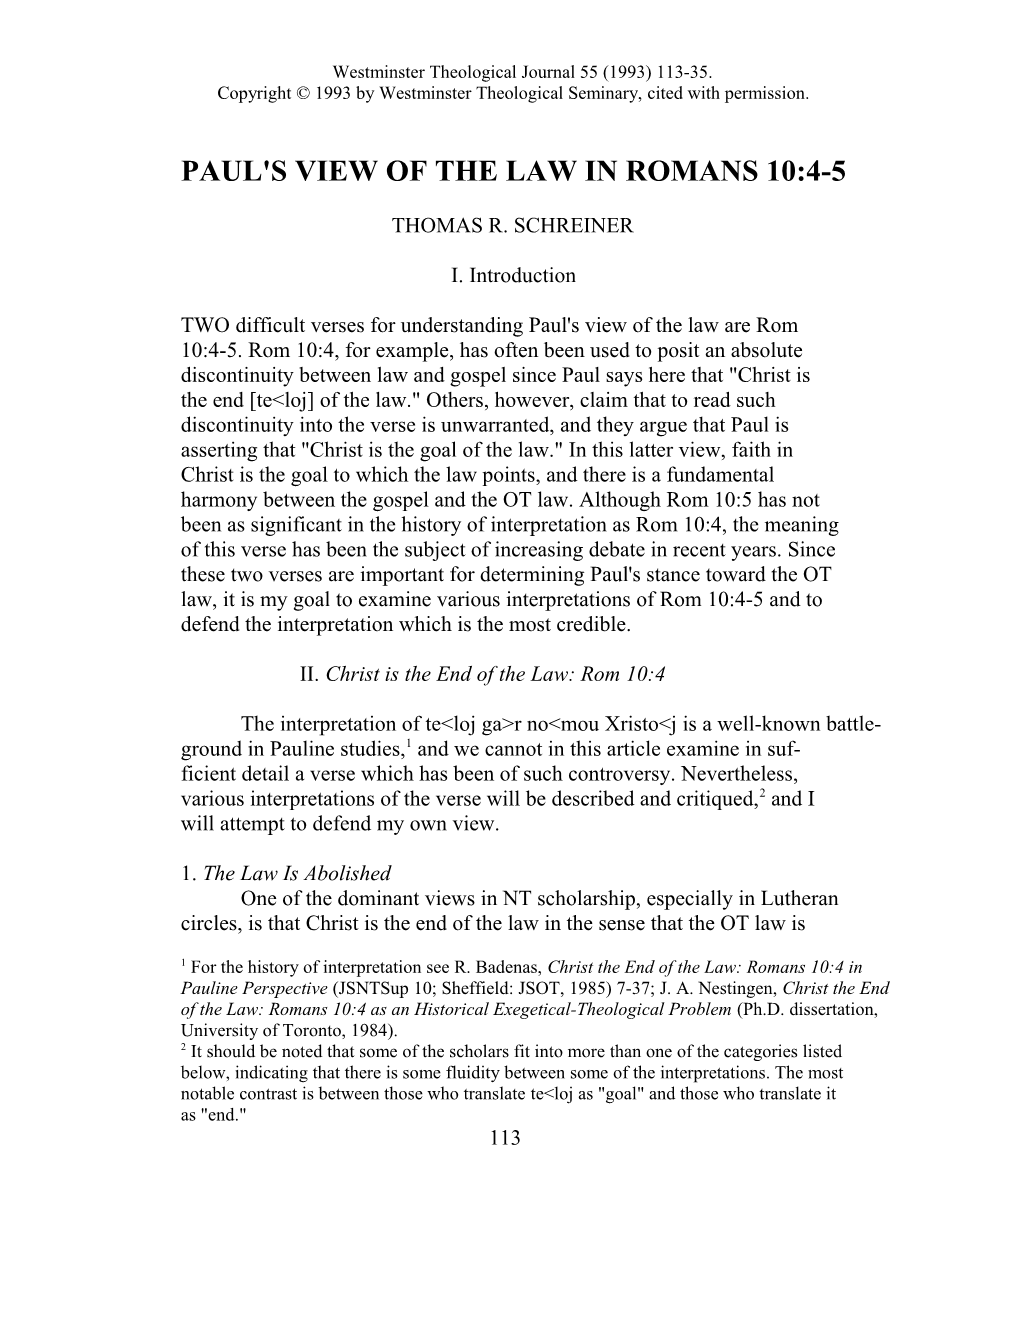 Paul's View of the Law in Romans 10:4-5